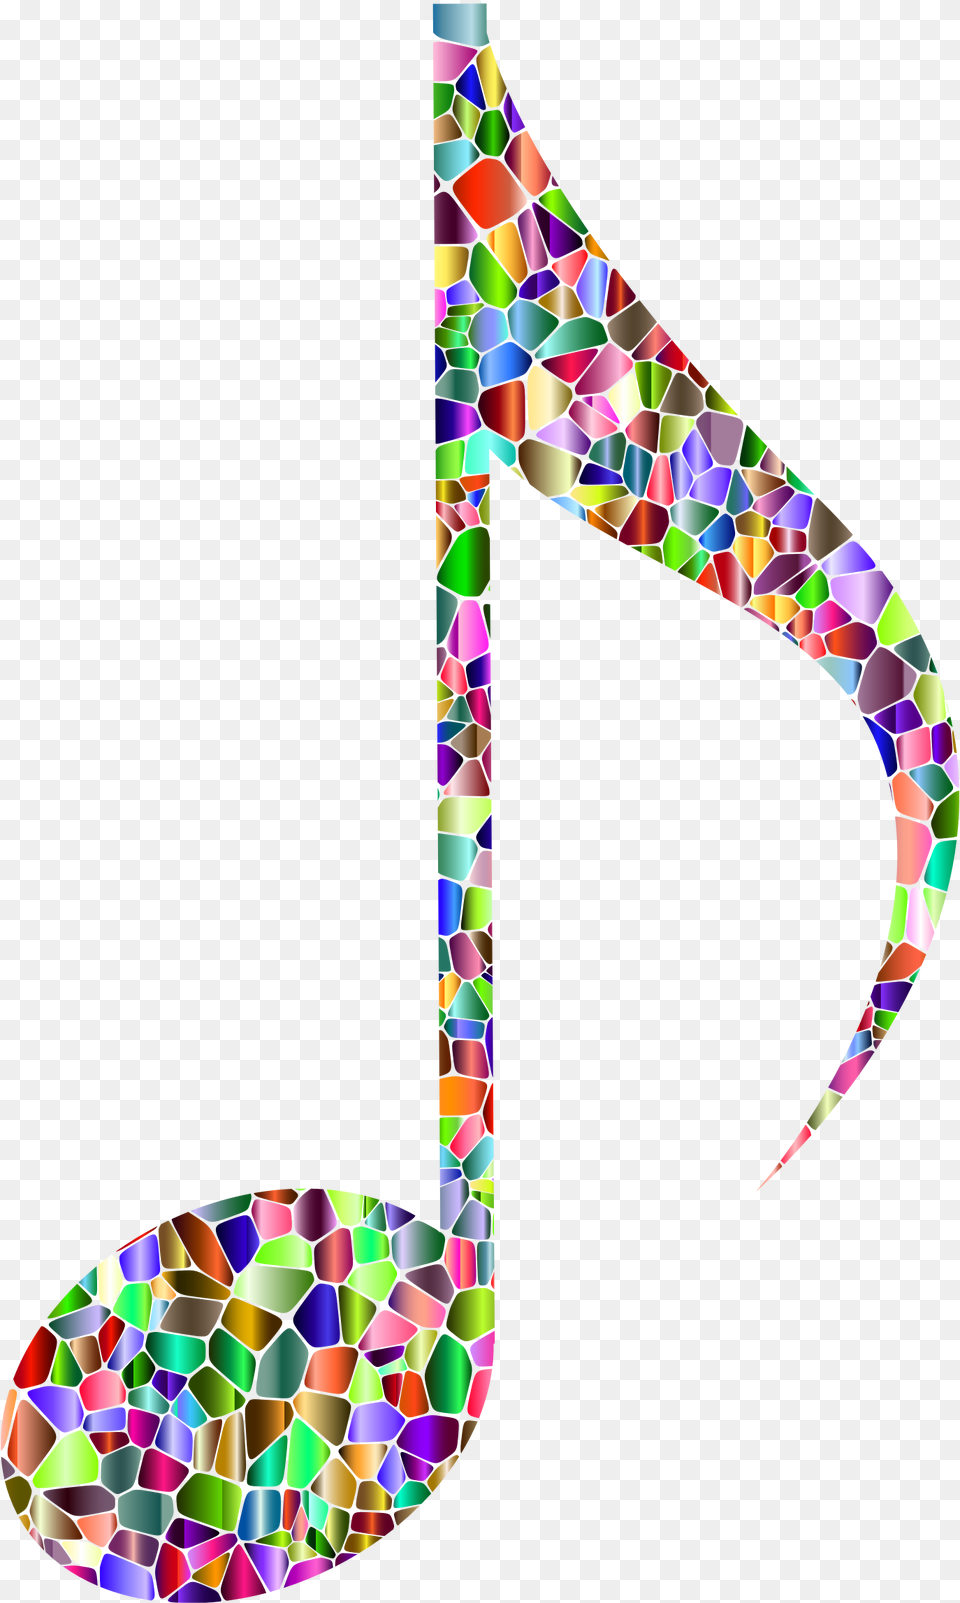 Vivid Chromatic Tiled Musical Note 12 Clip Arts Rainbow Music Notes Clipart, Art, Graphics, Modern Art, Text Png